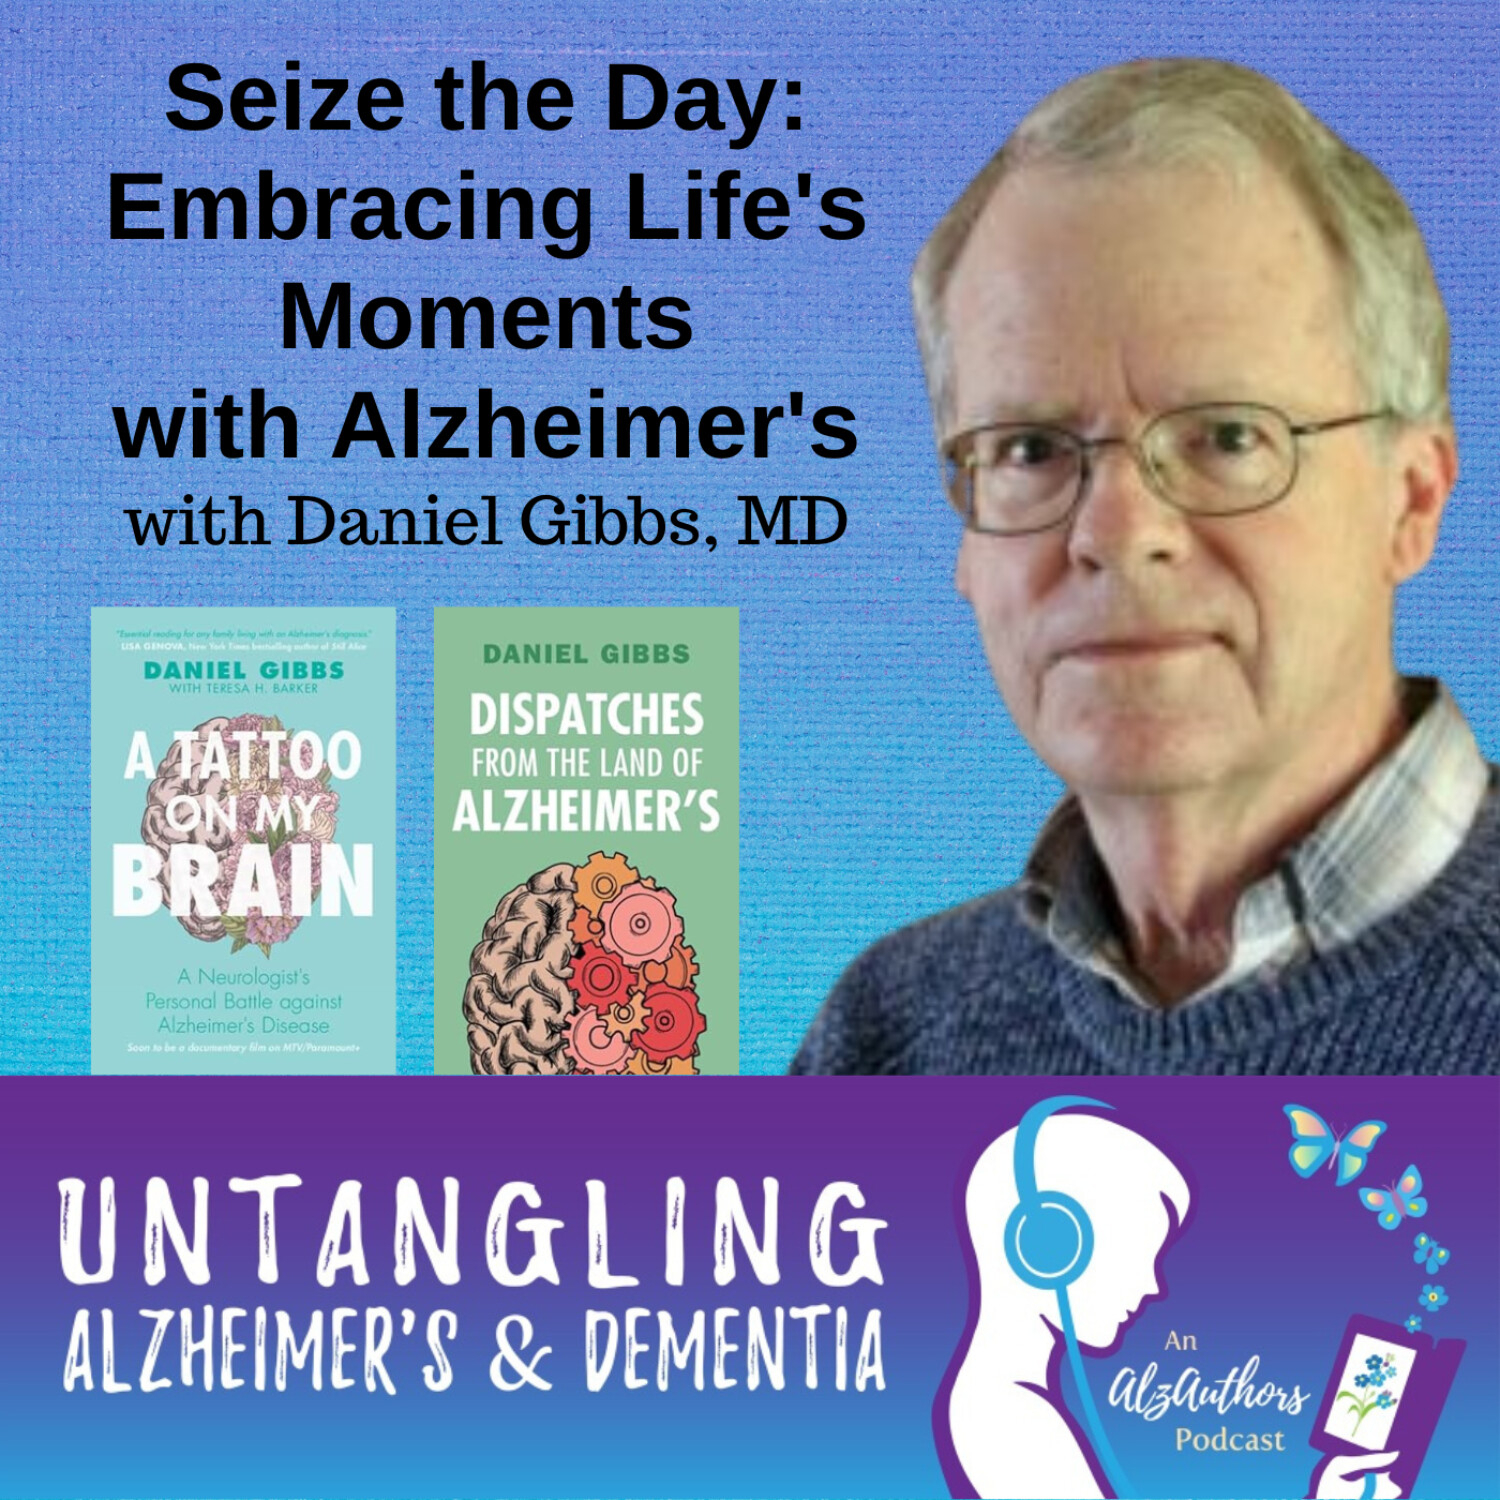 Seize the Day: Embracing Life’s Moments with Alzheimer’s